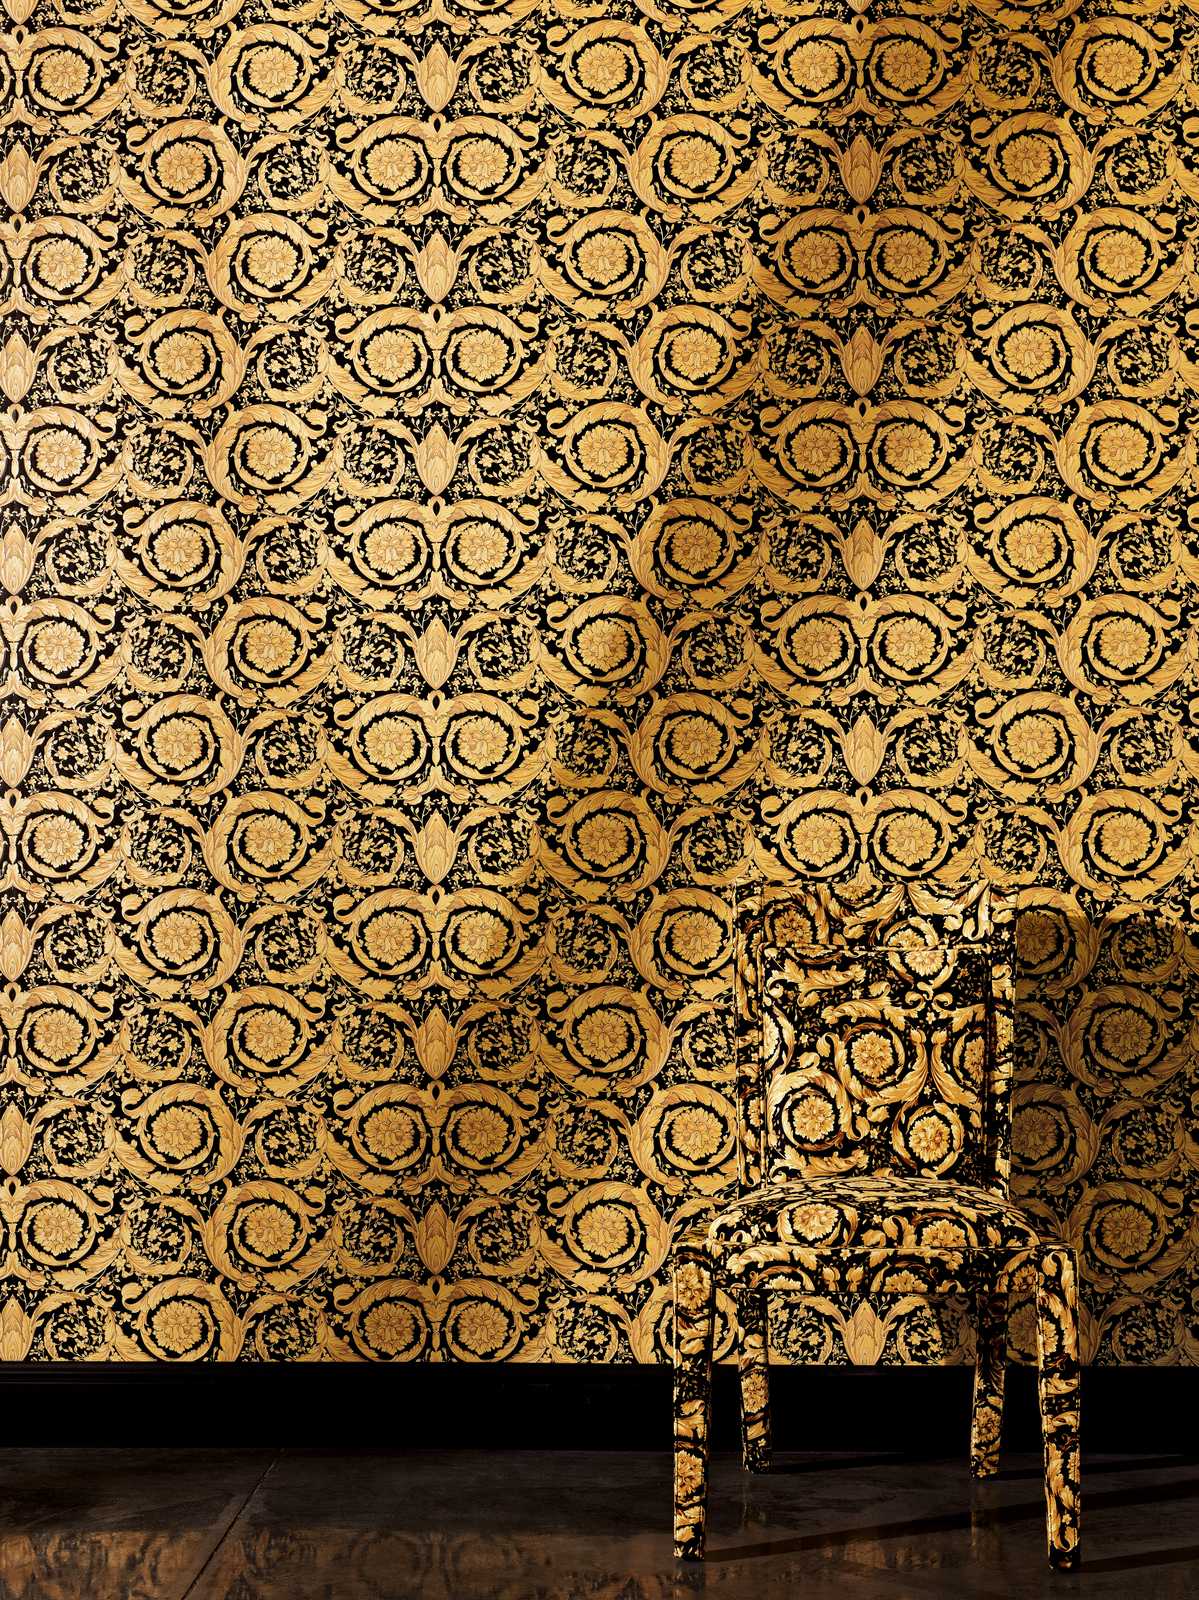             VERSACE wallpaper with ornamental floral pattern - gold, black
        